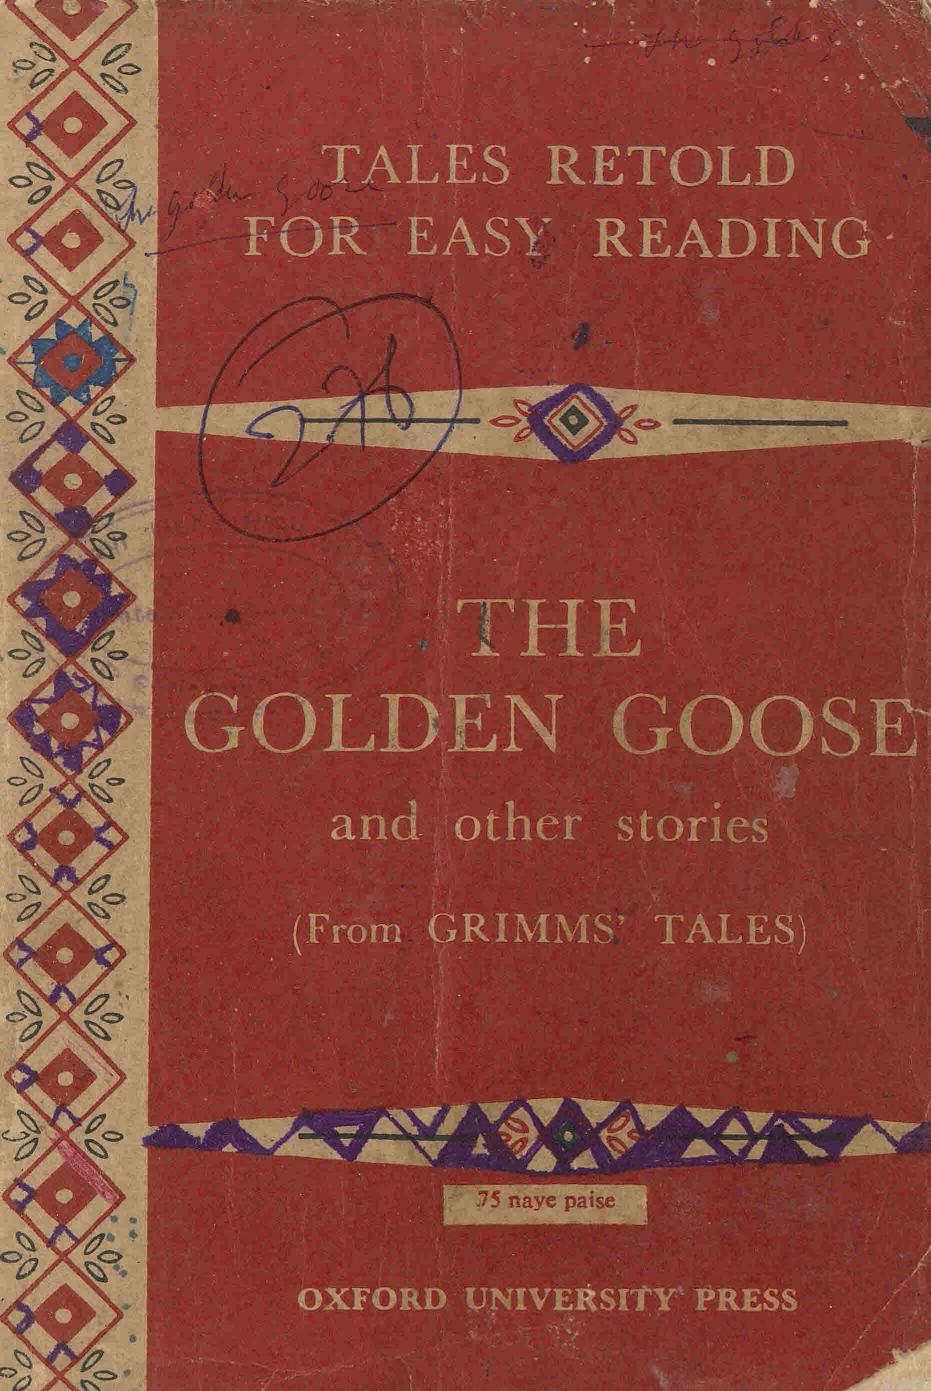 1962 - The Golden Goose and Other Stories - A. S. Hornby